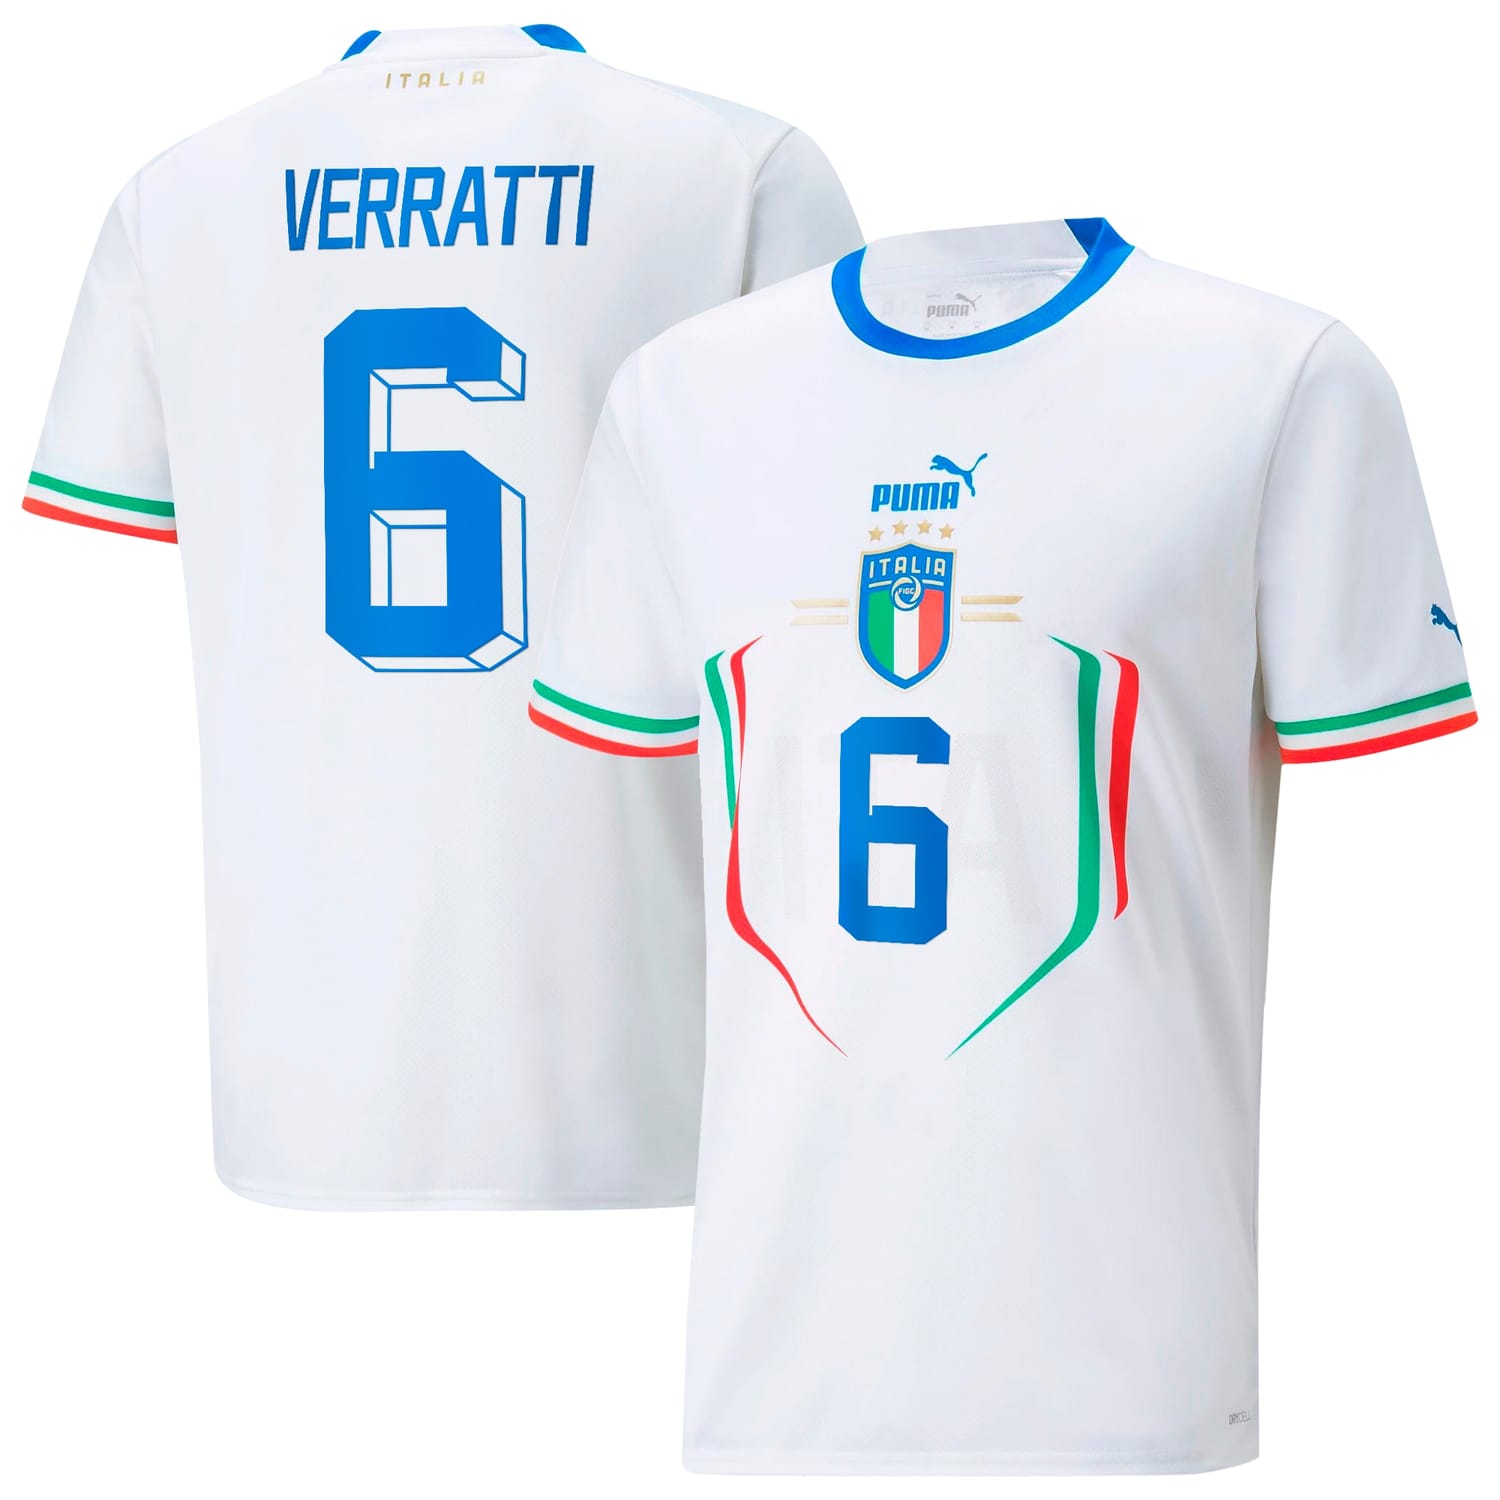 Italy National Team Away Jersey Shirt White 2022-23 player Marco Verratti printing for Men